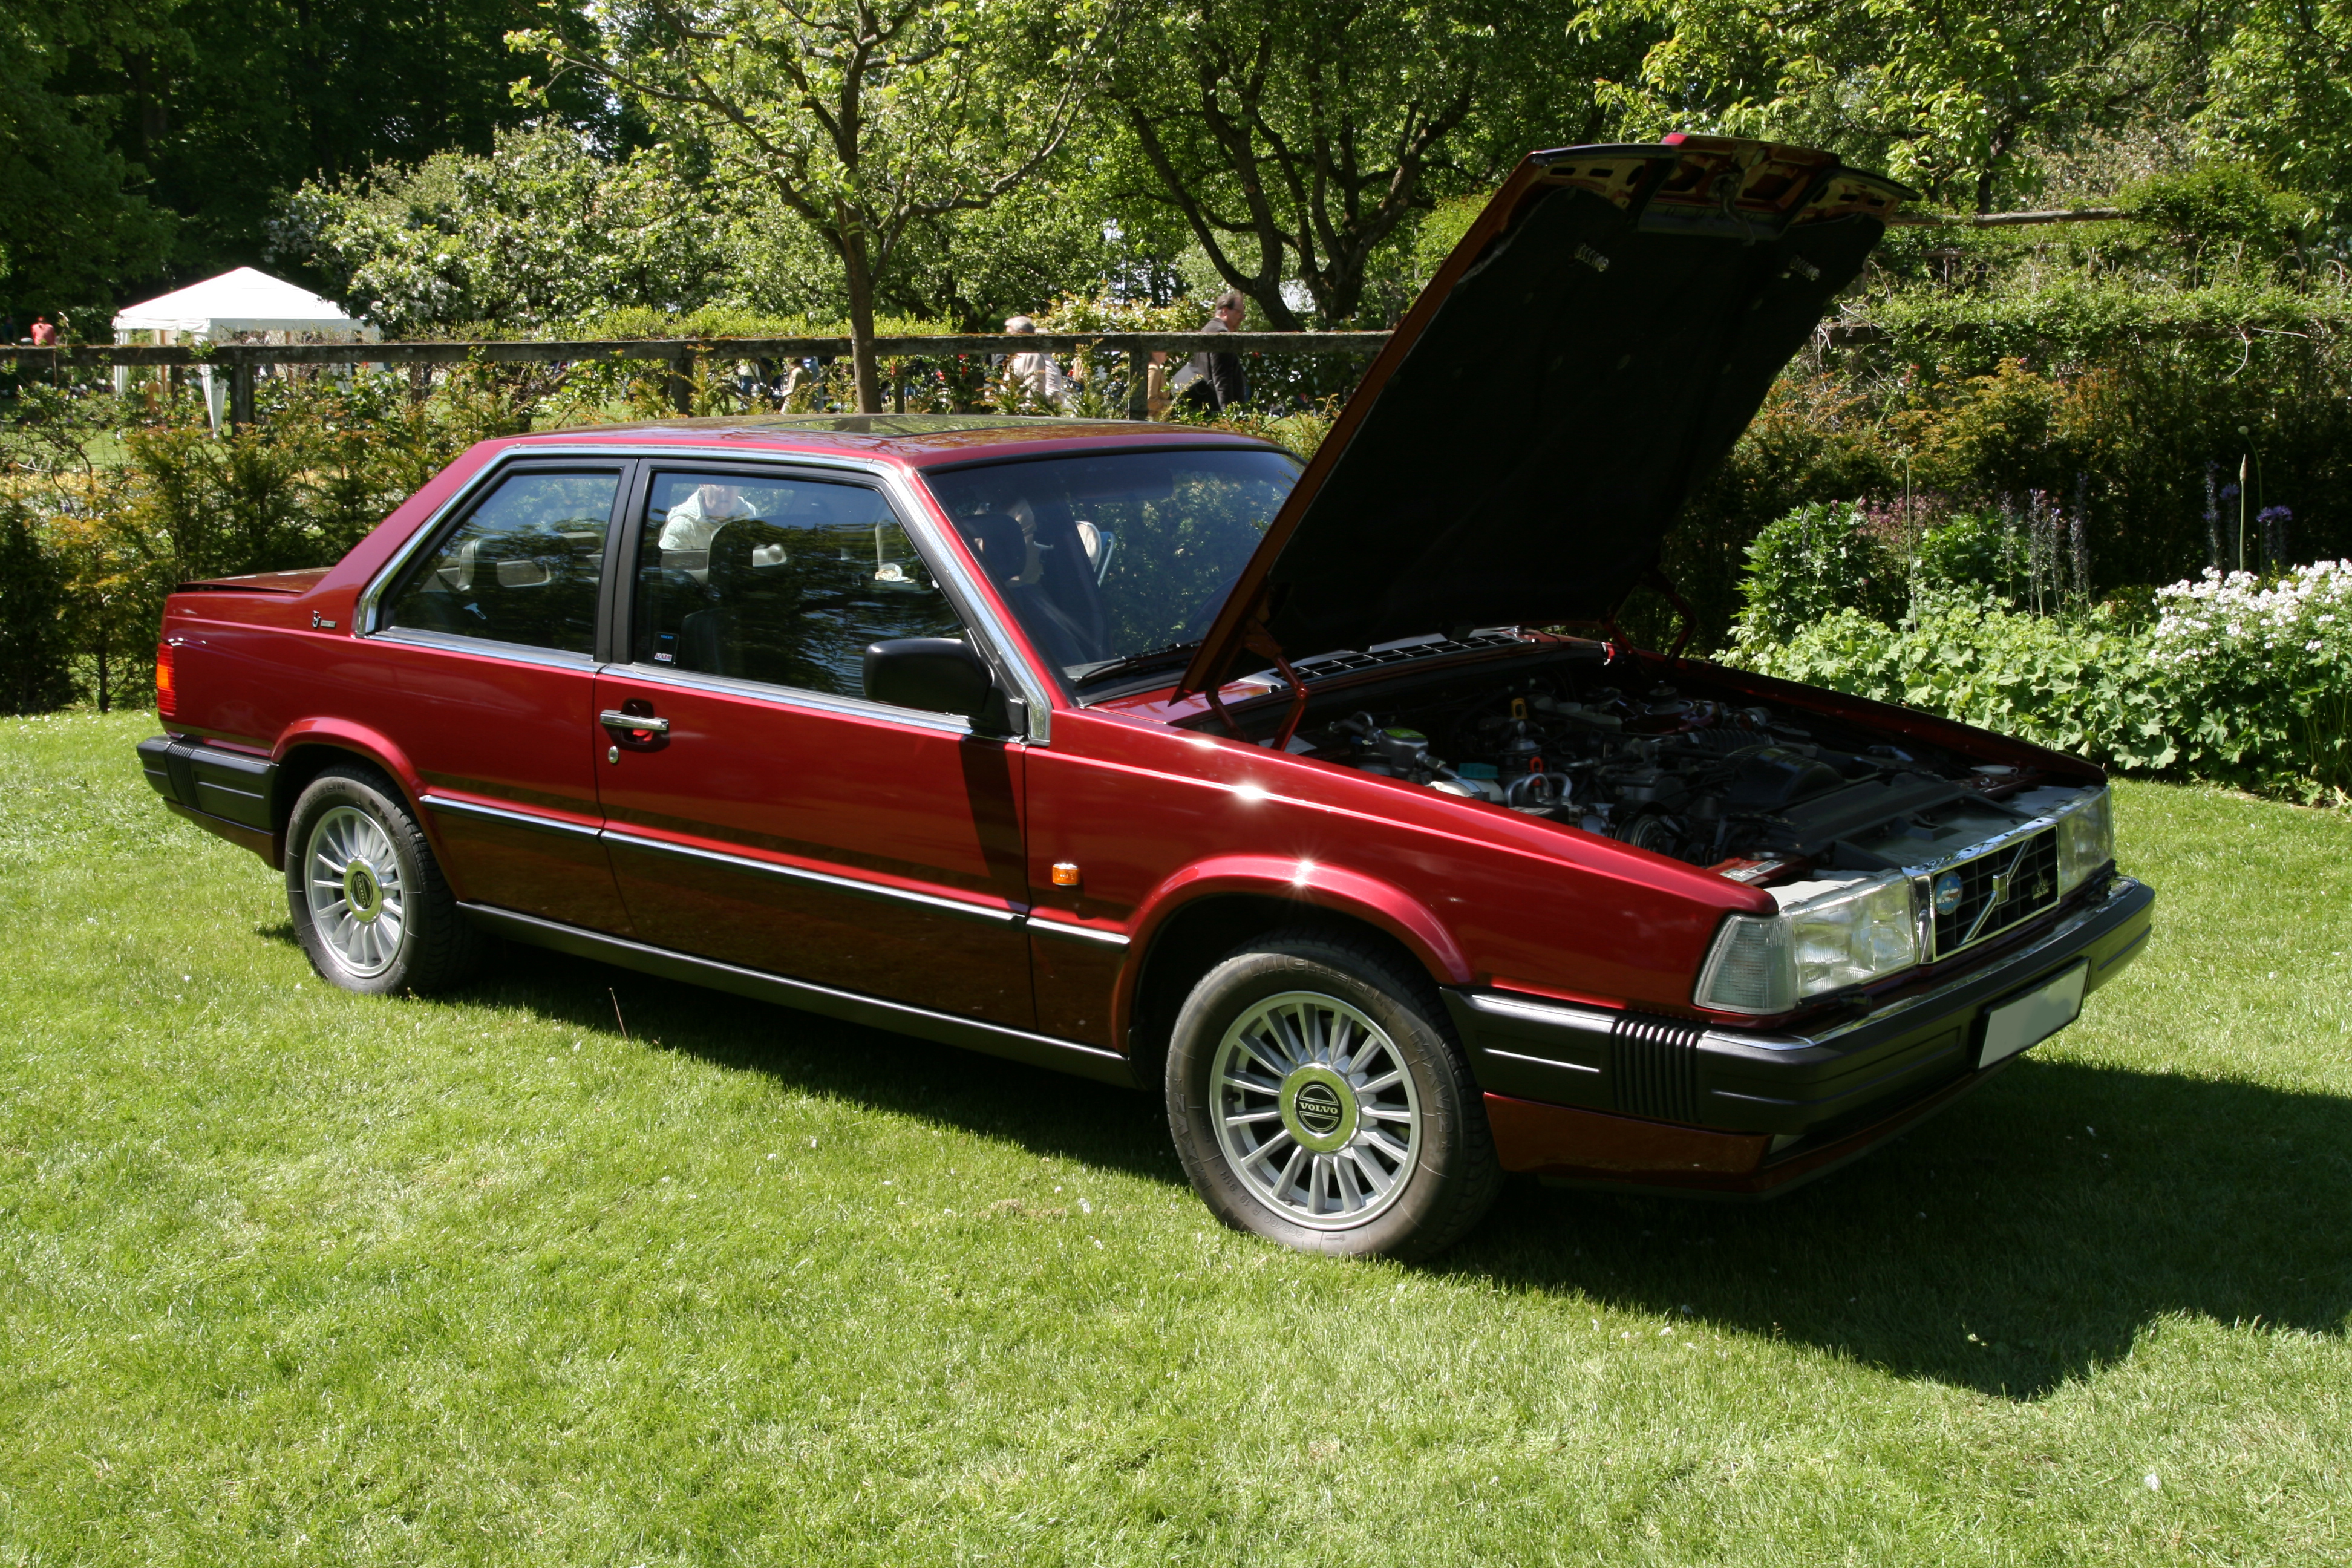 File:Volvo 780 (1988) front right.jpg - Wikimedia Commons